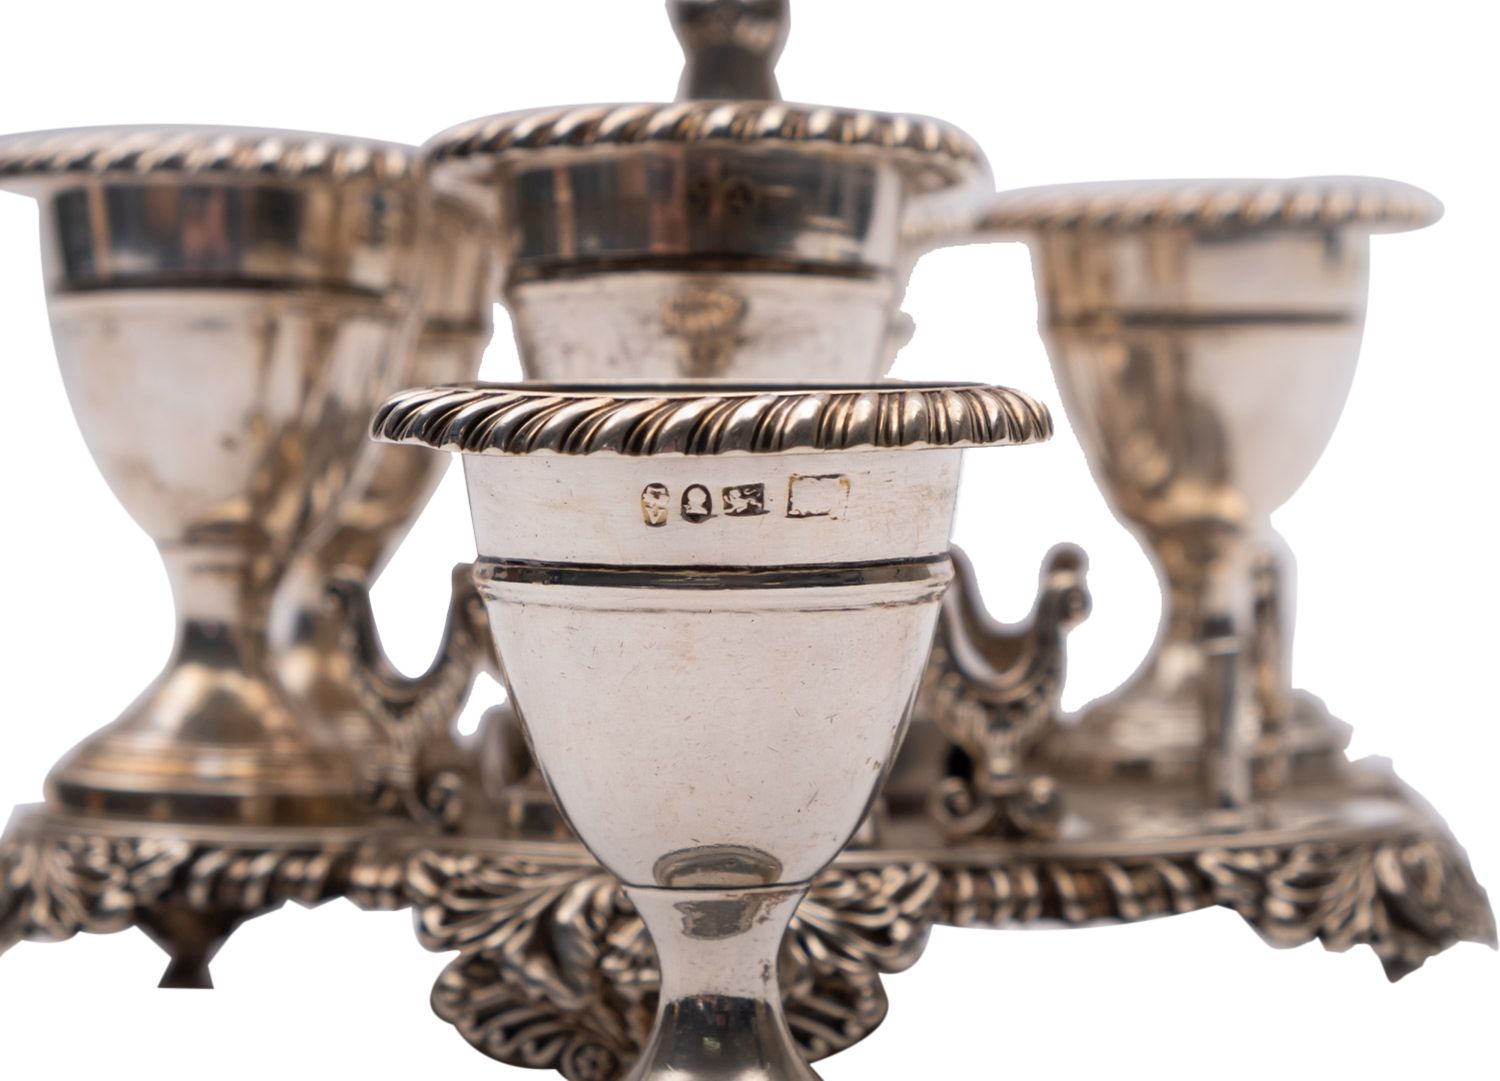 A late George III silver hexafoil egg stand by Smith, Tate & Co. - Image 2 of 2